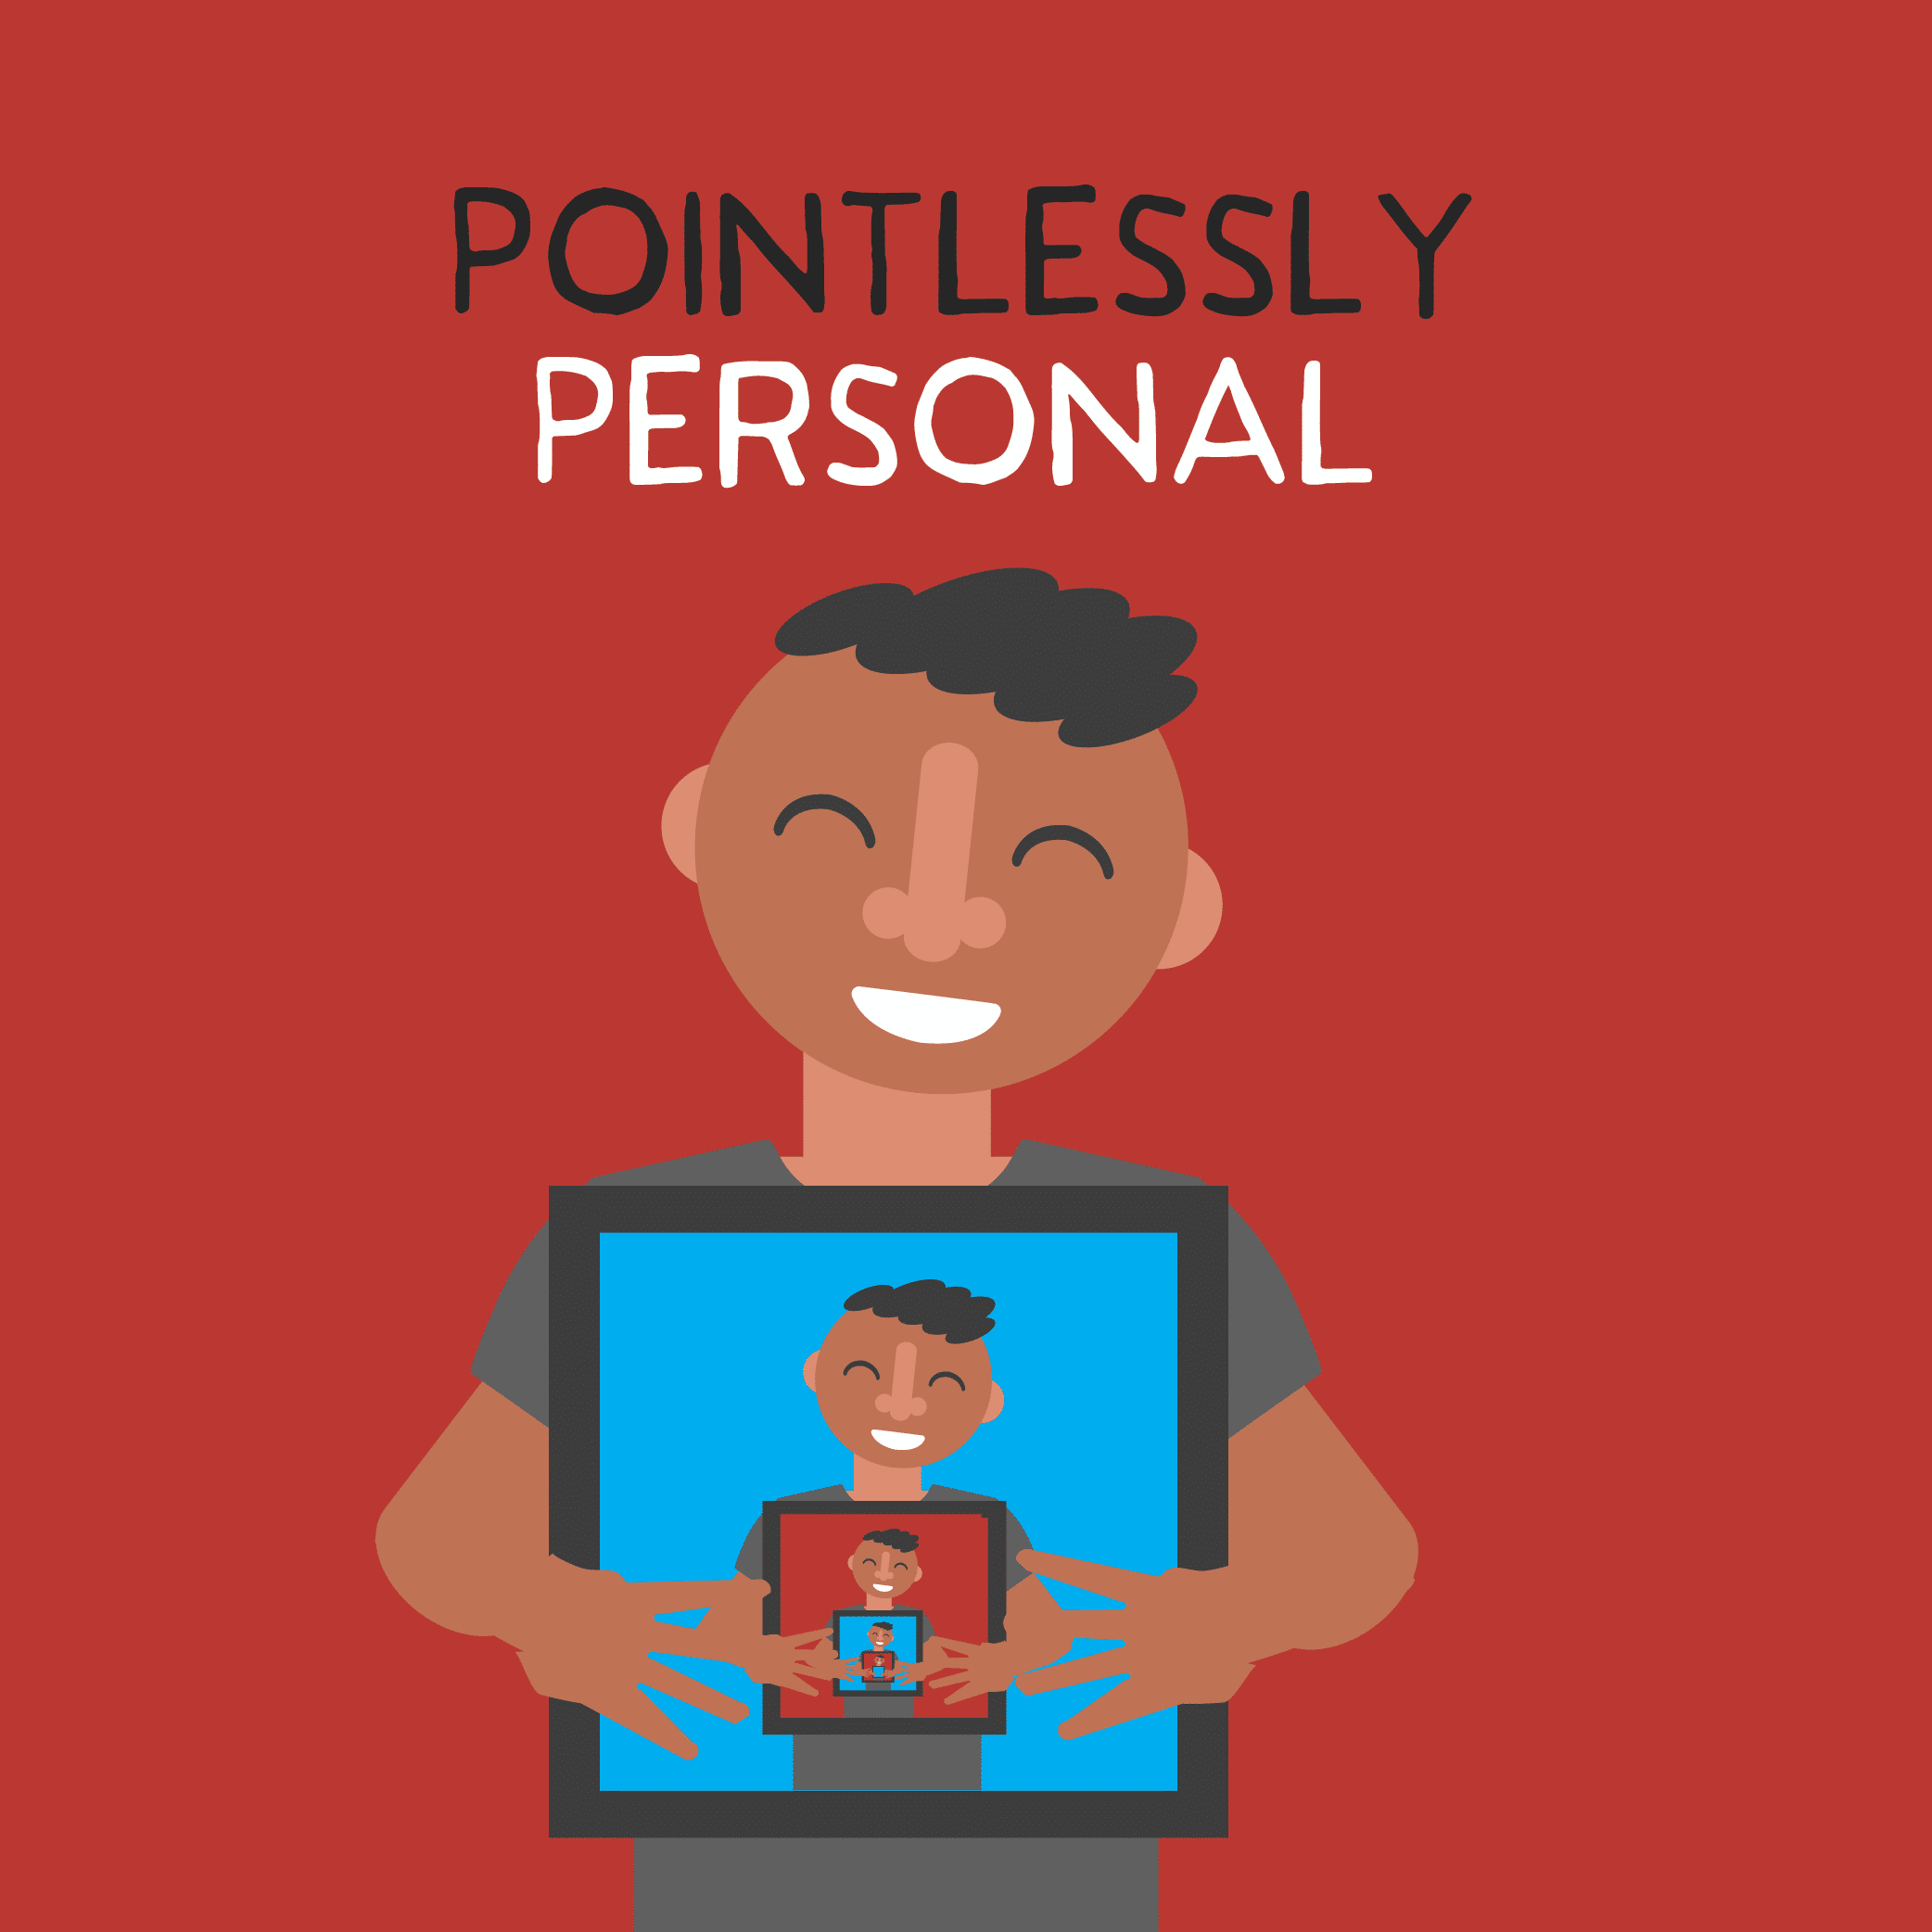 Illustration of a person holding a picture of himself holding a picture of himself.